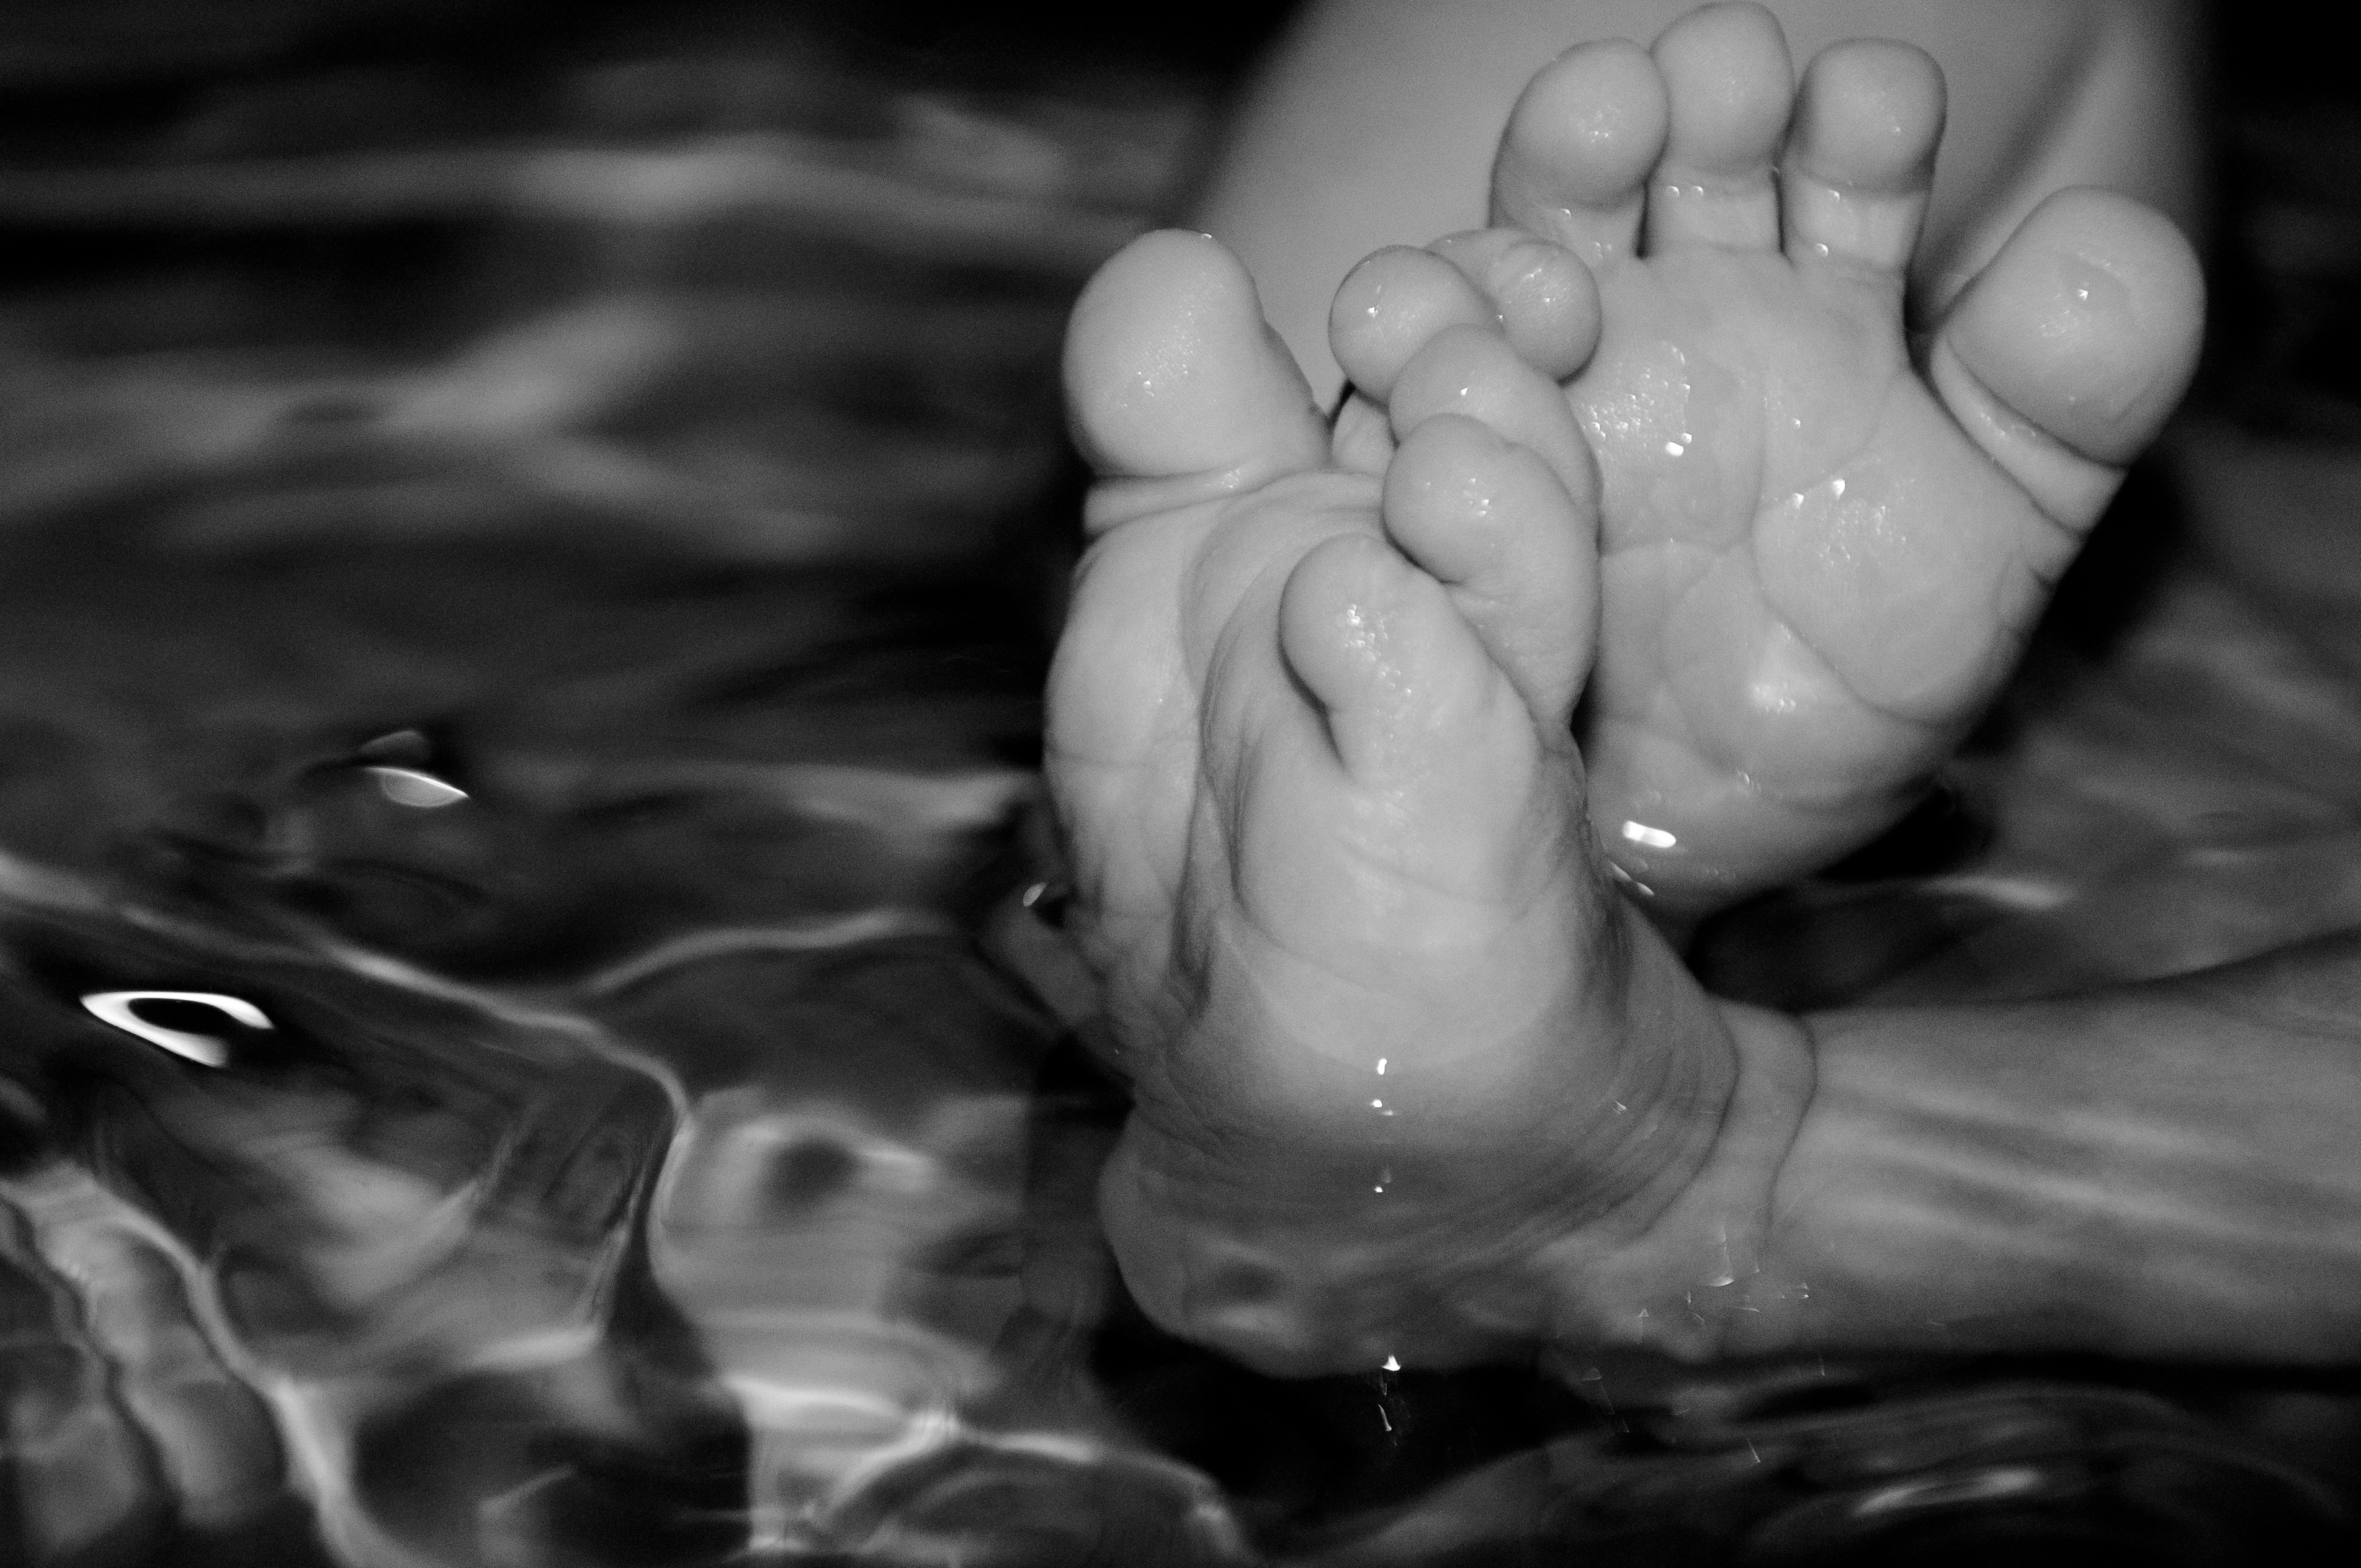 Newborn baby feet, Adorable, Parenting, Lovely, Male, HQ Photo